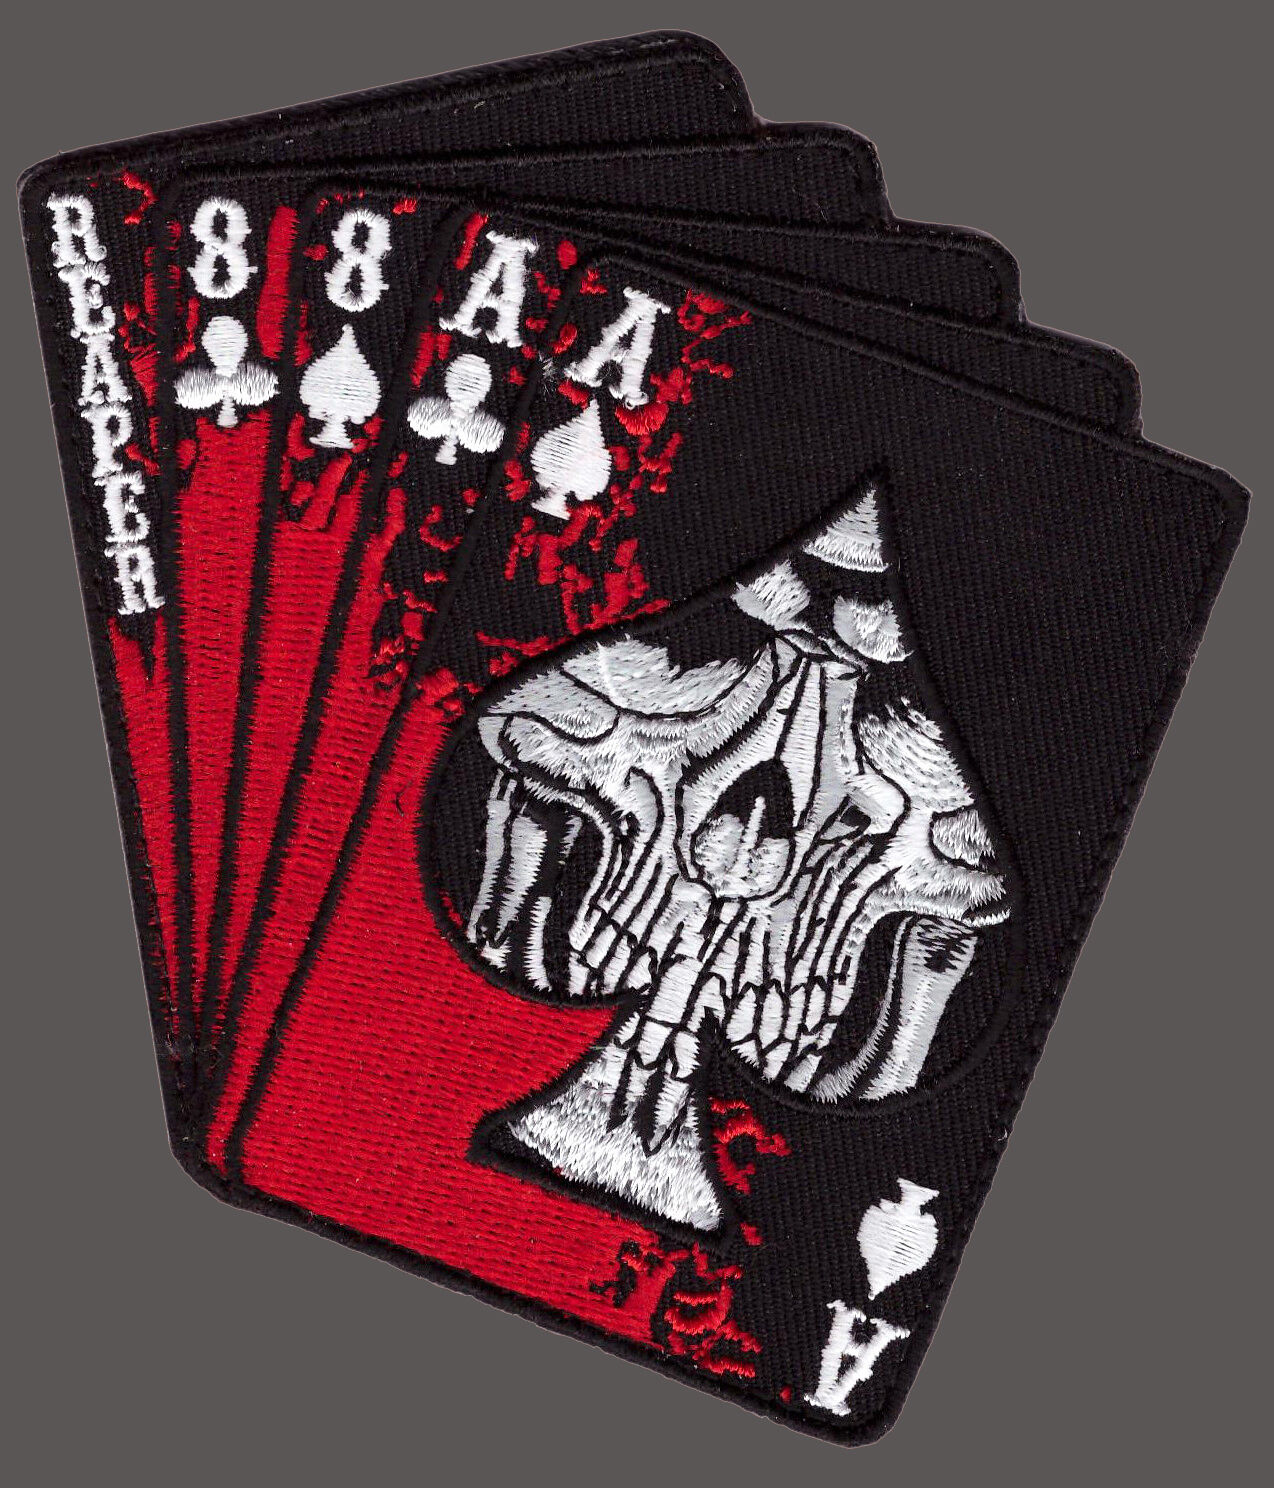 REAPER DEAD MAN'S HAND ACES REAPER SKULL SPADE IRON ON MC PATCH BY MILTACUSA